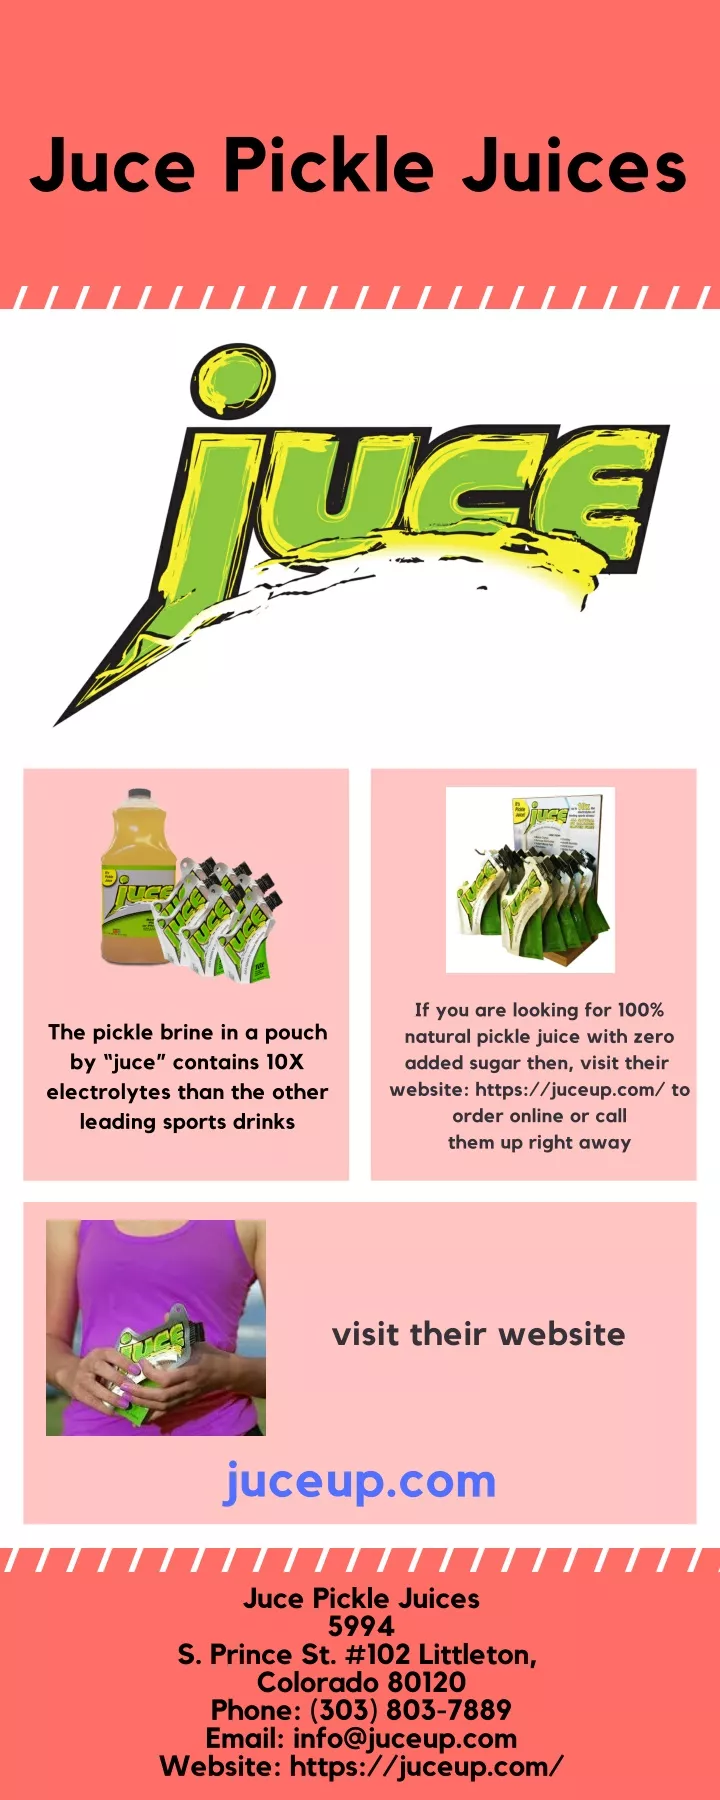 juce pickle juices